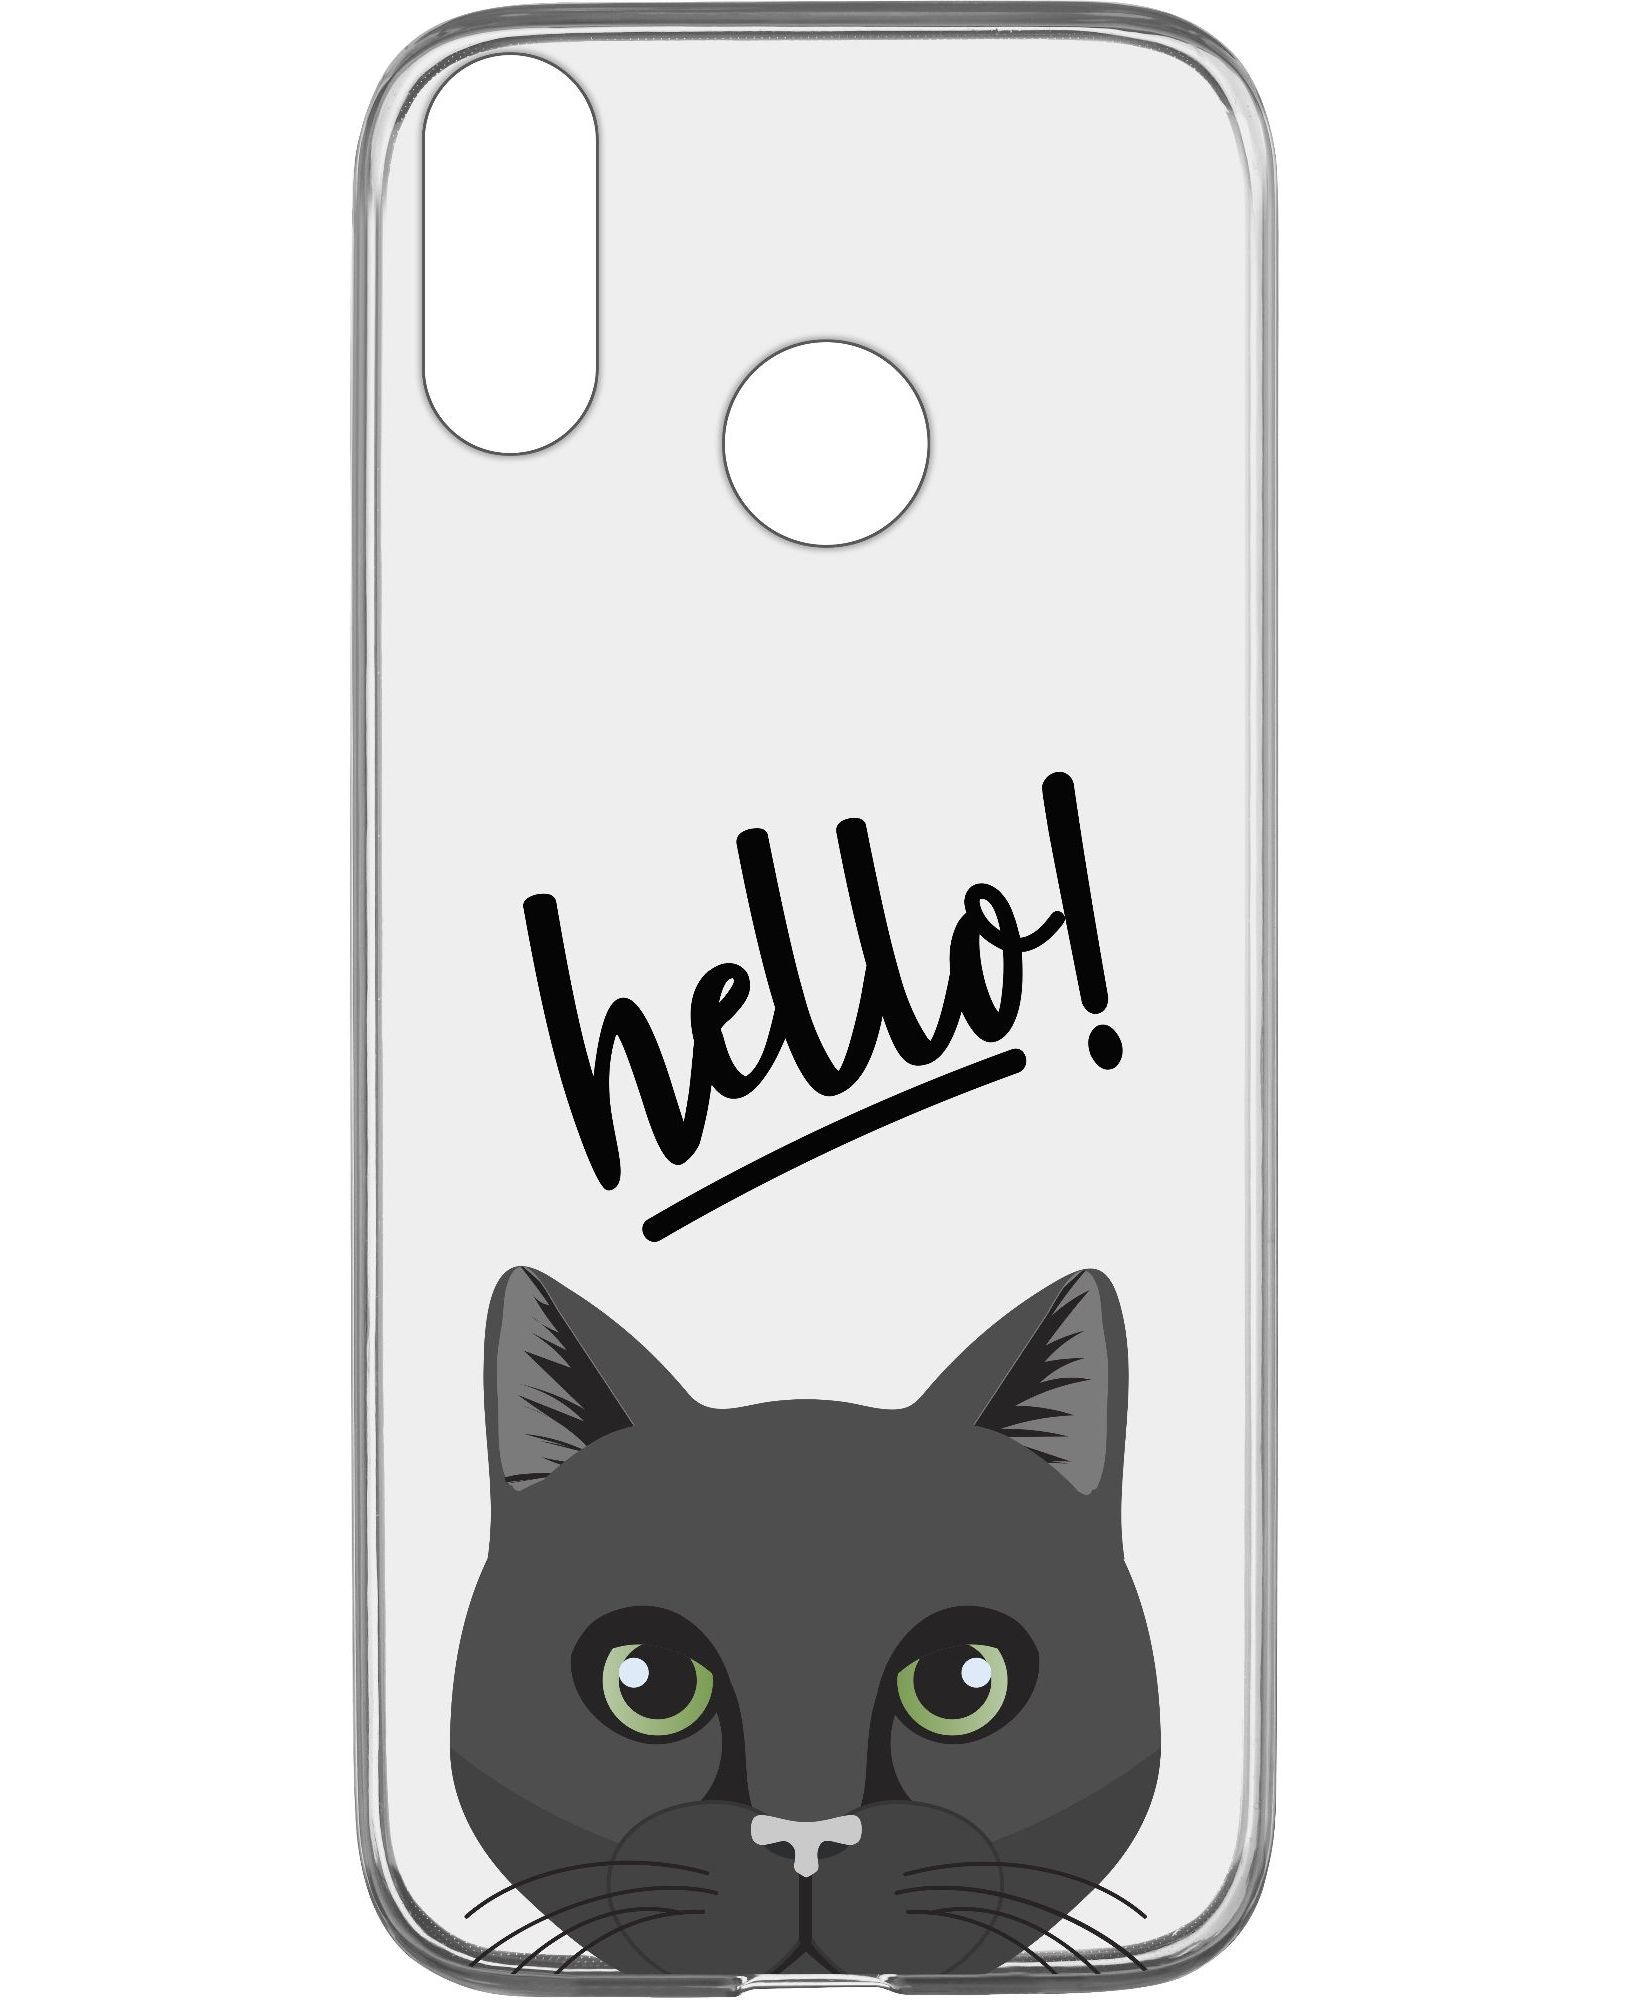 Huawei P20 Lite, case style, hello cats